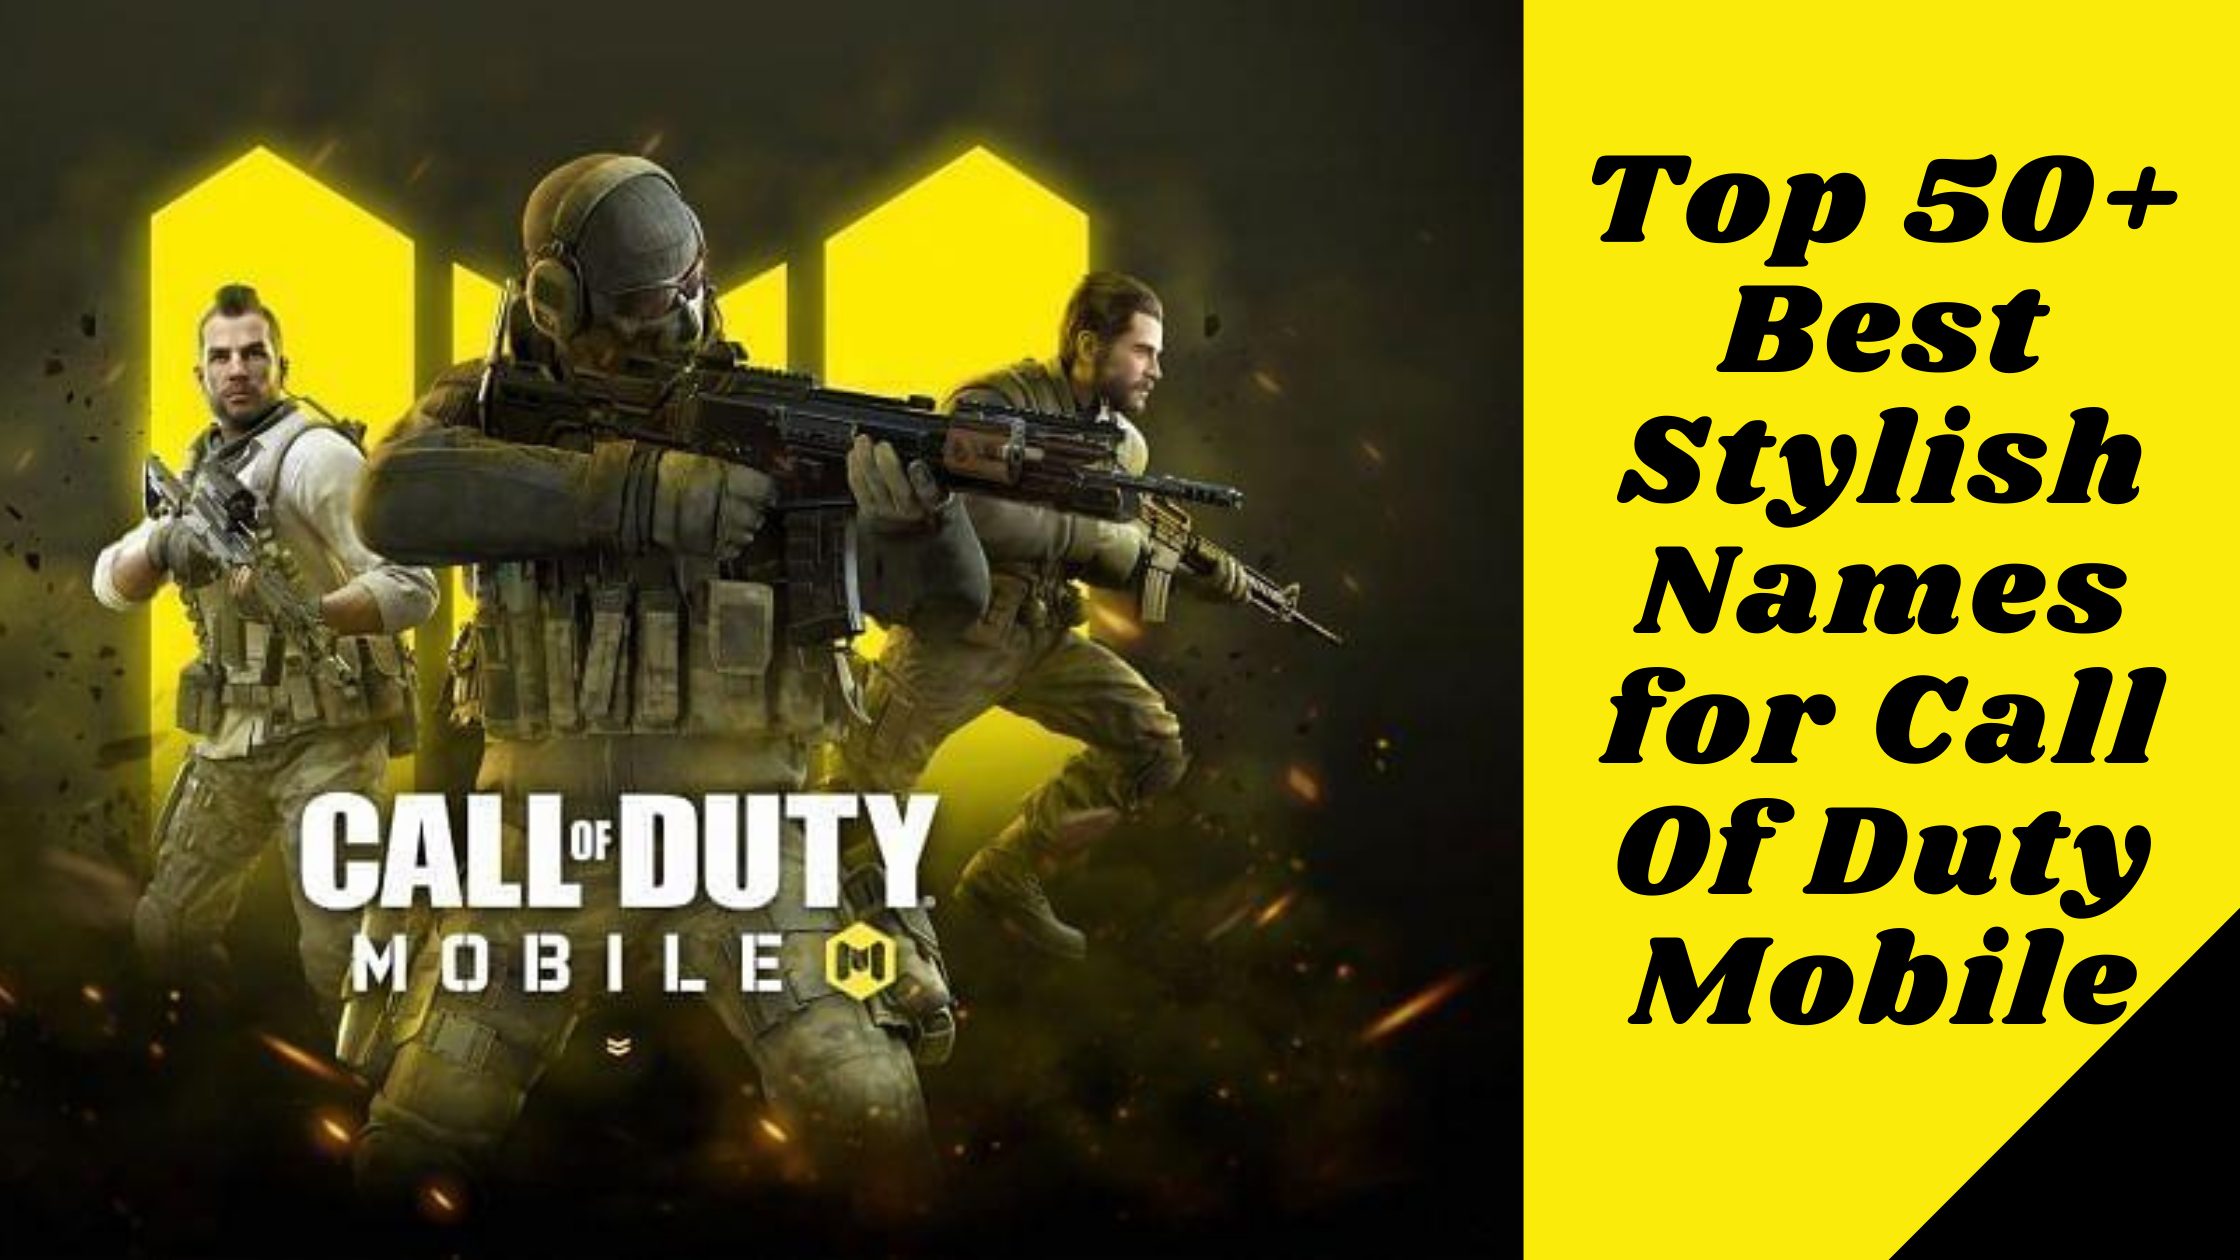 Top 50 Best Stylish Names For Call Of Duty Mobile Playerzon Blog